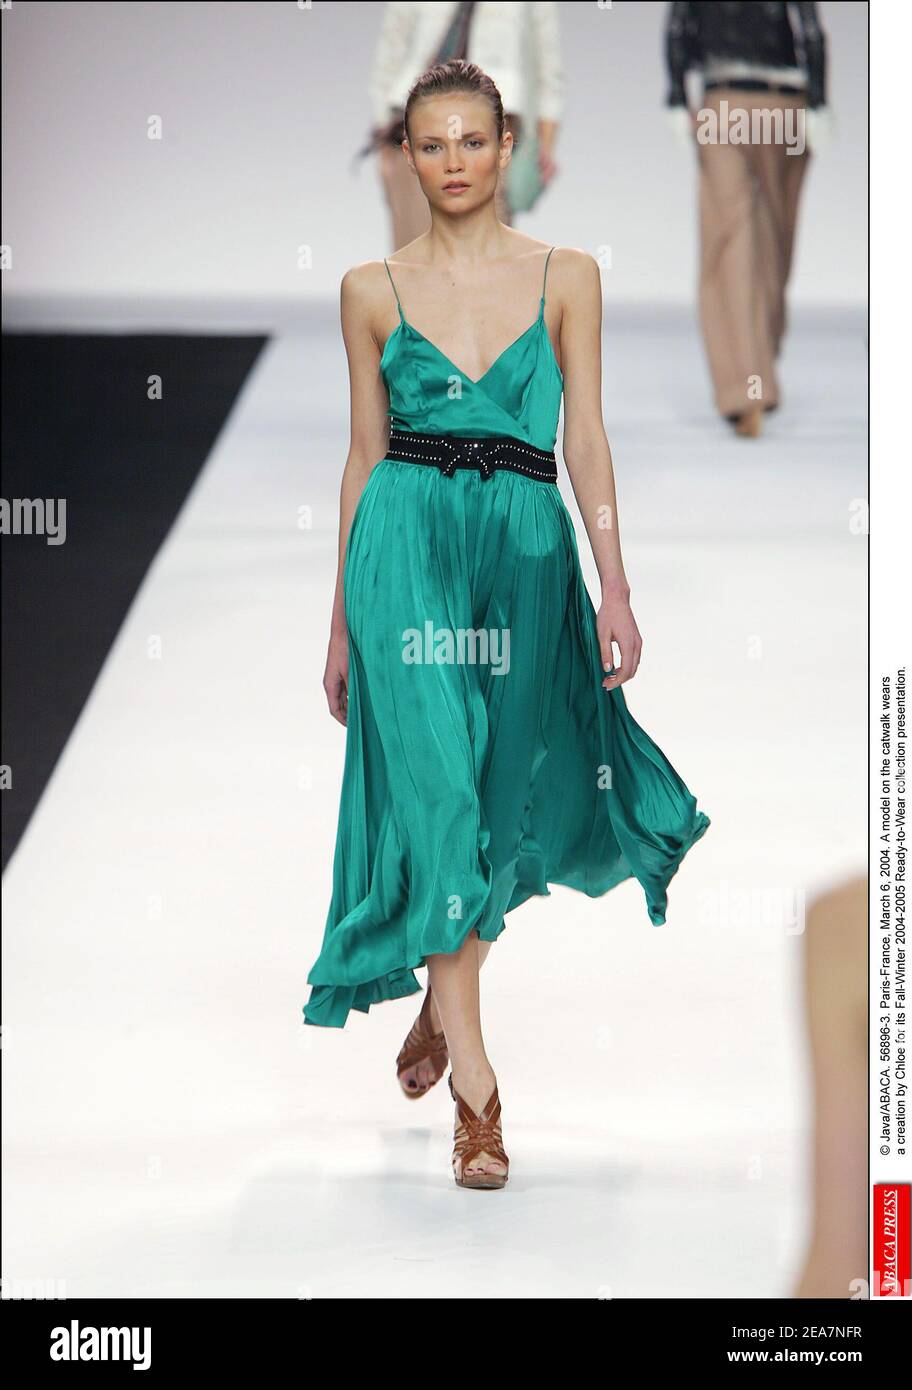 © Java/ABACA. 56896-3. Paris-France, March 6, 2004. A model on the catwalk wears a creation by Chloe for its Fall-Winter 2004-2005 Ready-to-Wear collection presentation. Stock Photo